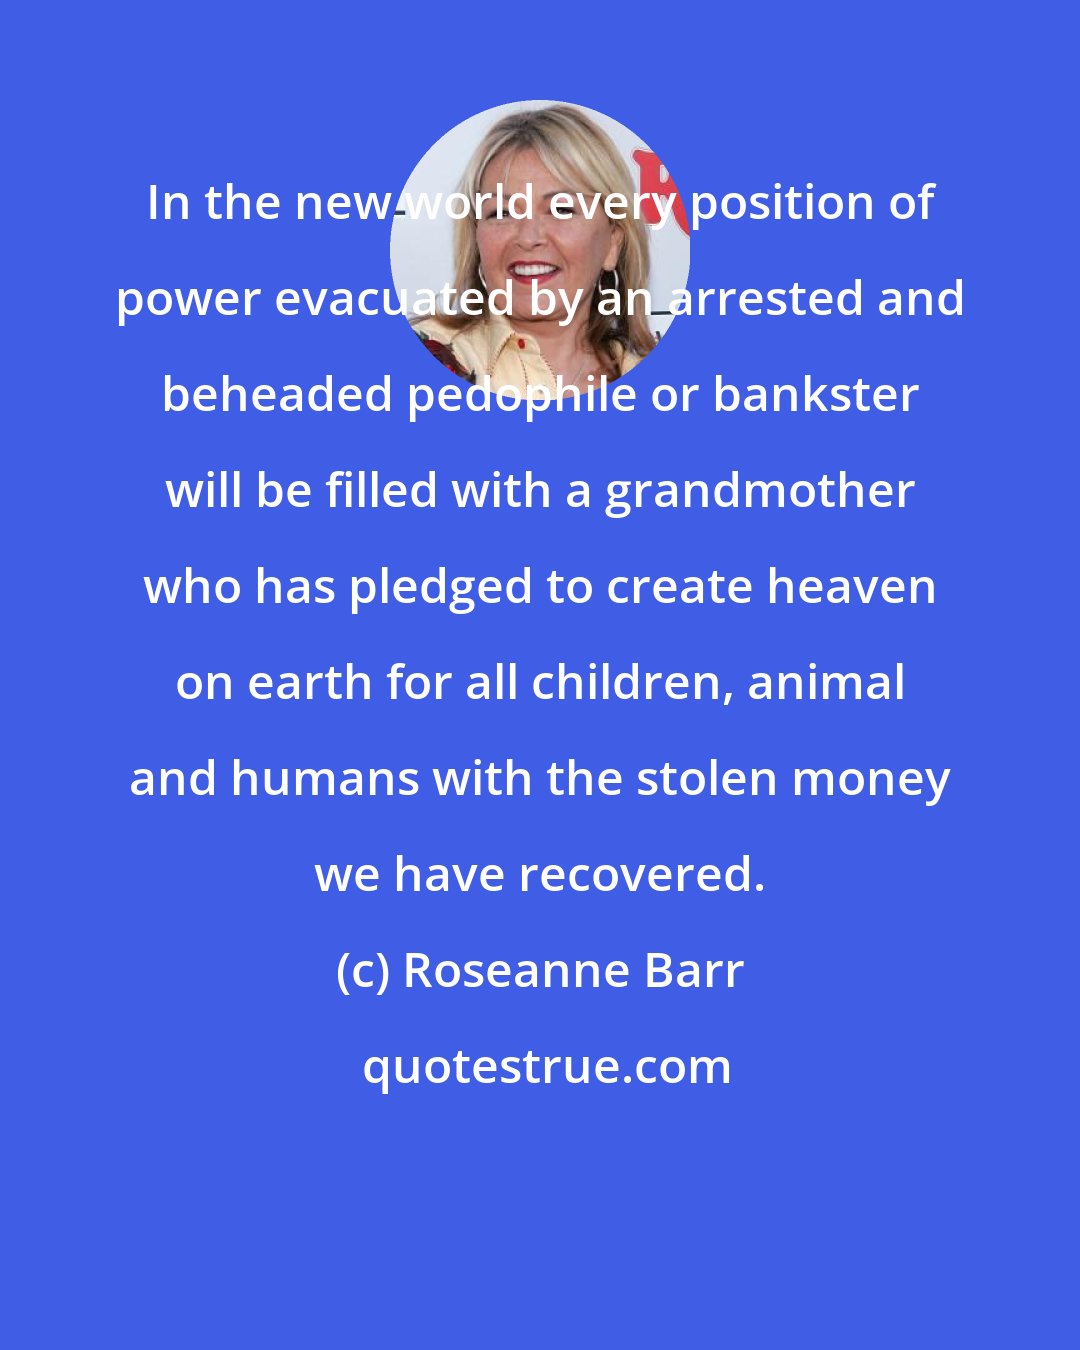 Roseanne Barr: In the new world every position of power evacuated by an arrested and beheaded pedophile or bankster will be filled with a grandmother who has pledged to create heaven on earth for all children, animal and humans with the stolen money we have recovered.